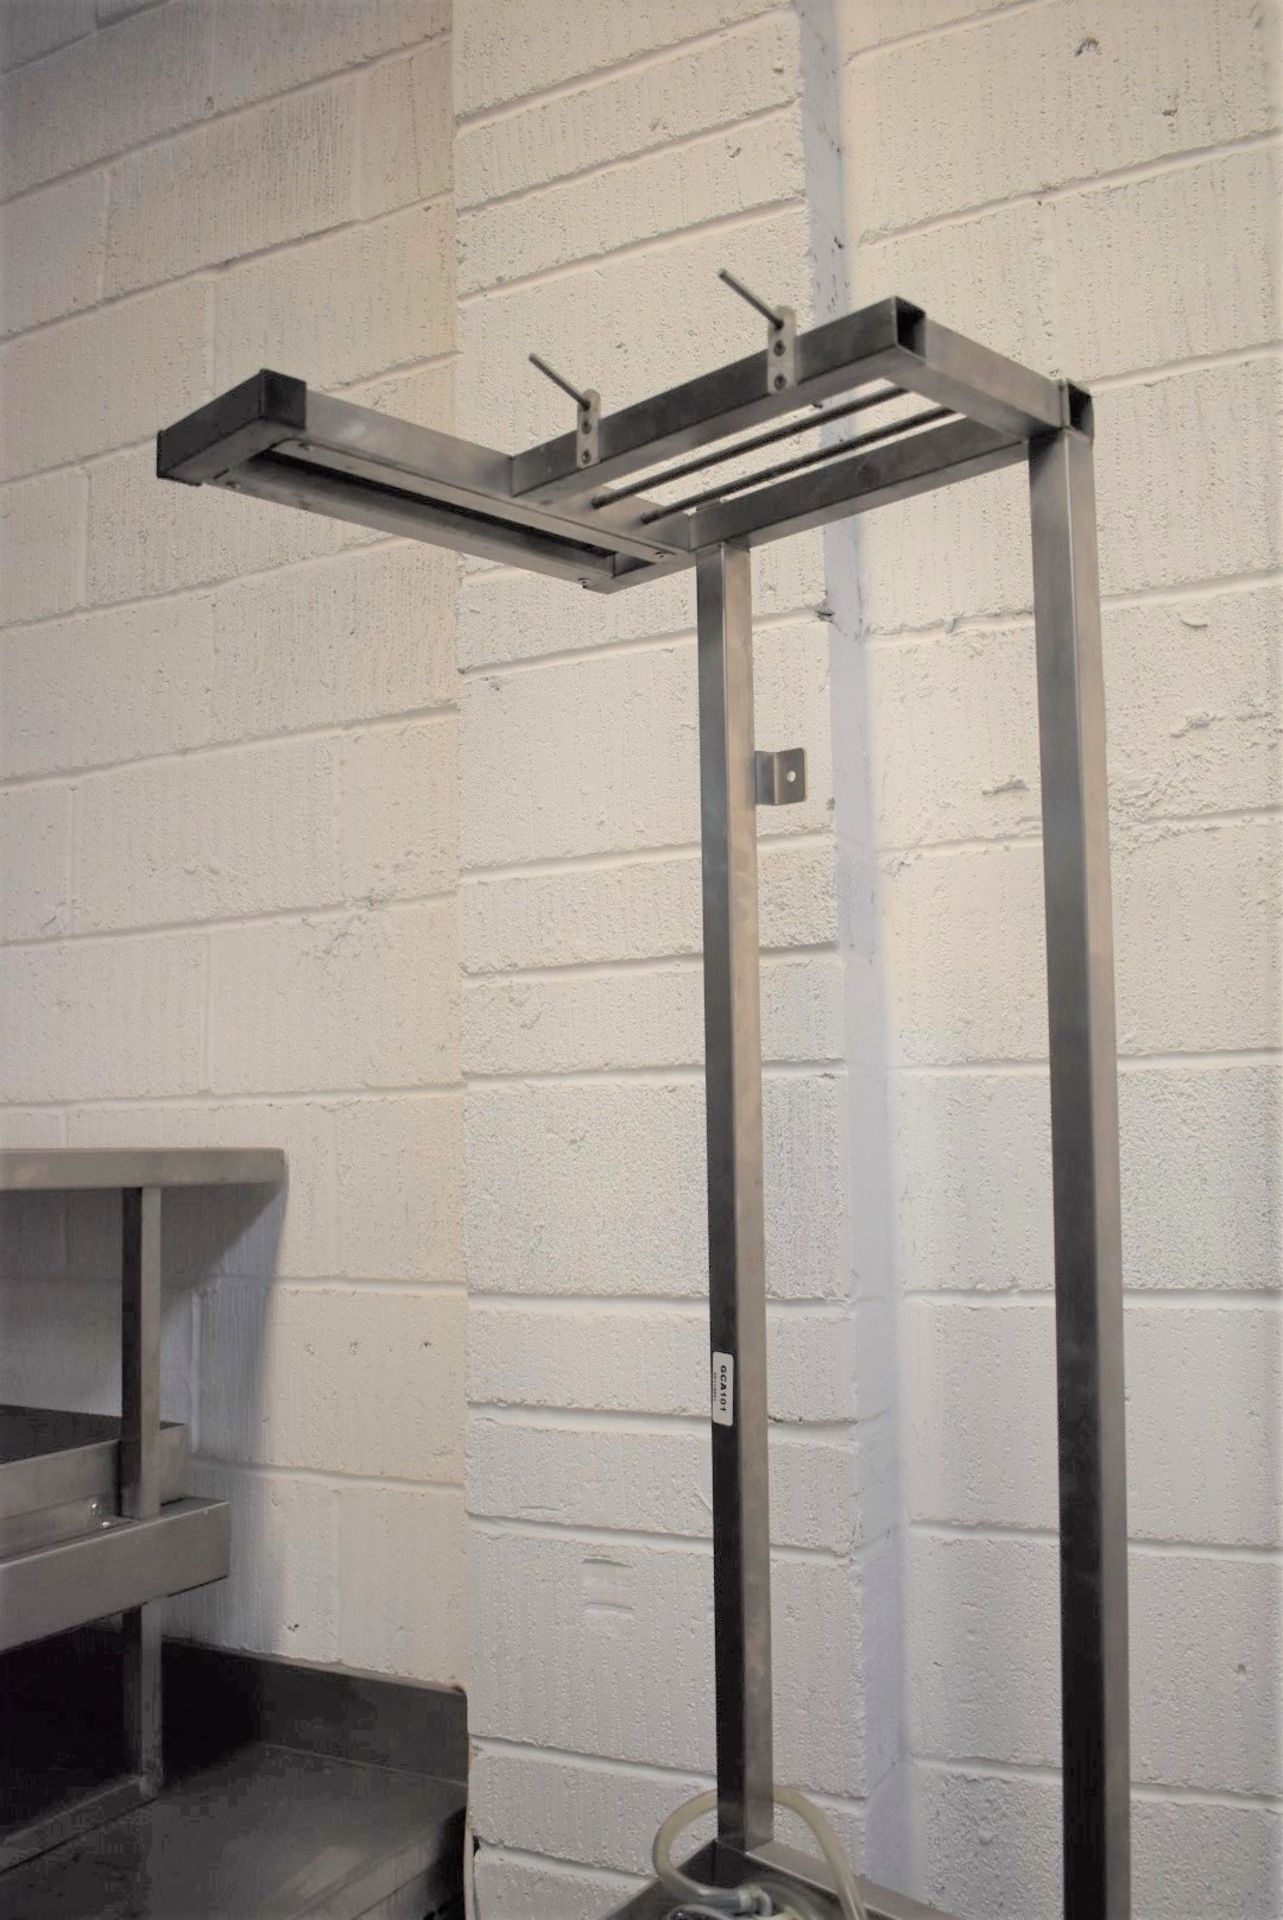 1 x Stainless Steel Commercial Kitchen Janitorial Mop / Cleaning Station - Dimensions: H187 x W33 - Image 3 of 6